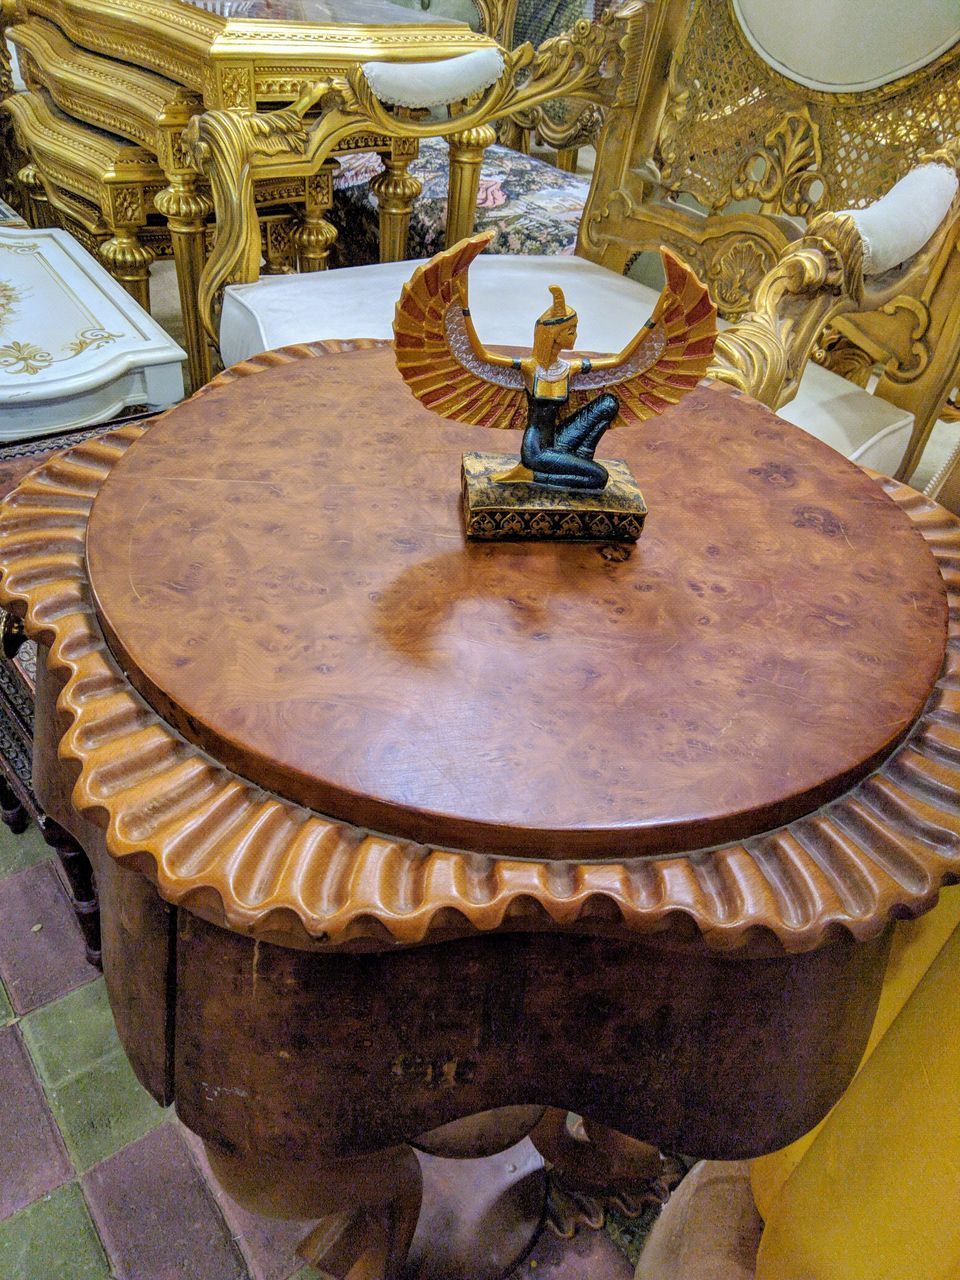 HIGH ANGLE VIEW OF SCULPTURES ON TABLE AT HOME